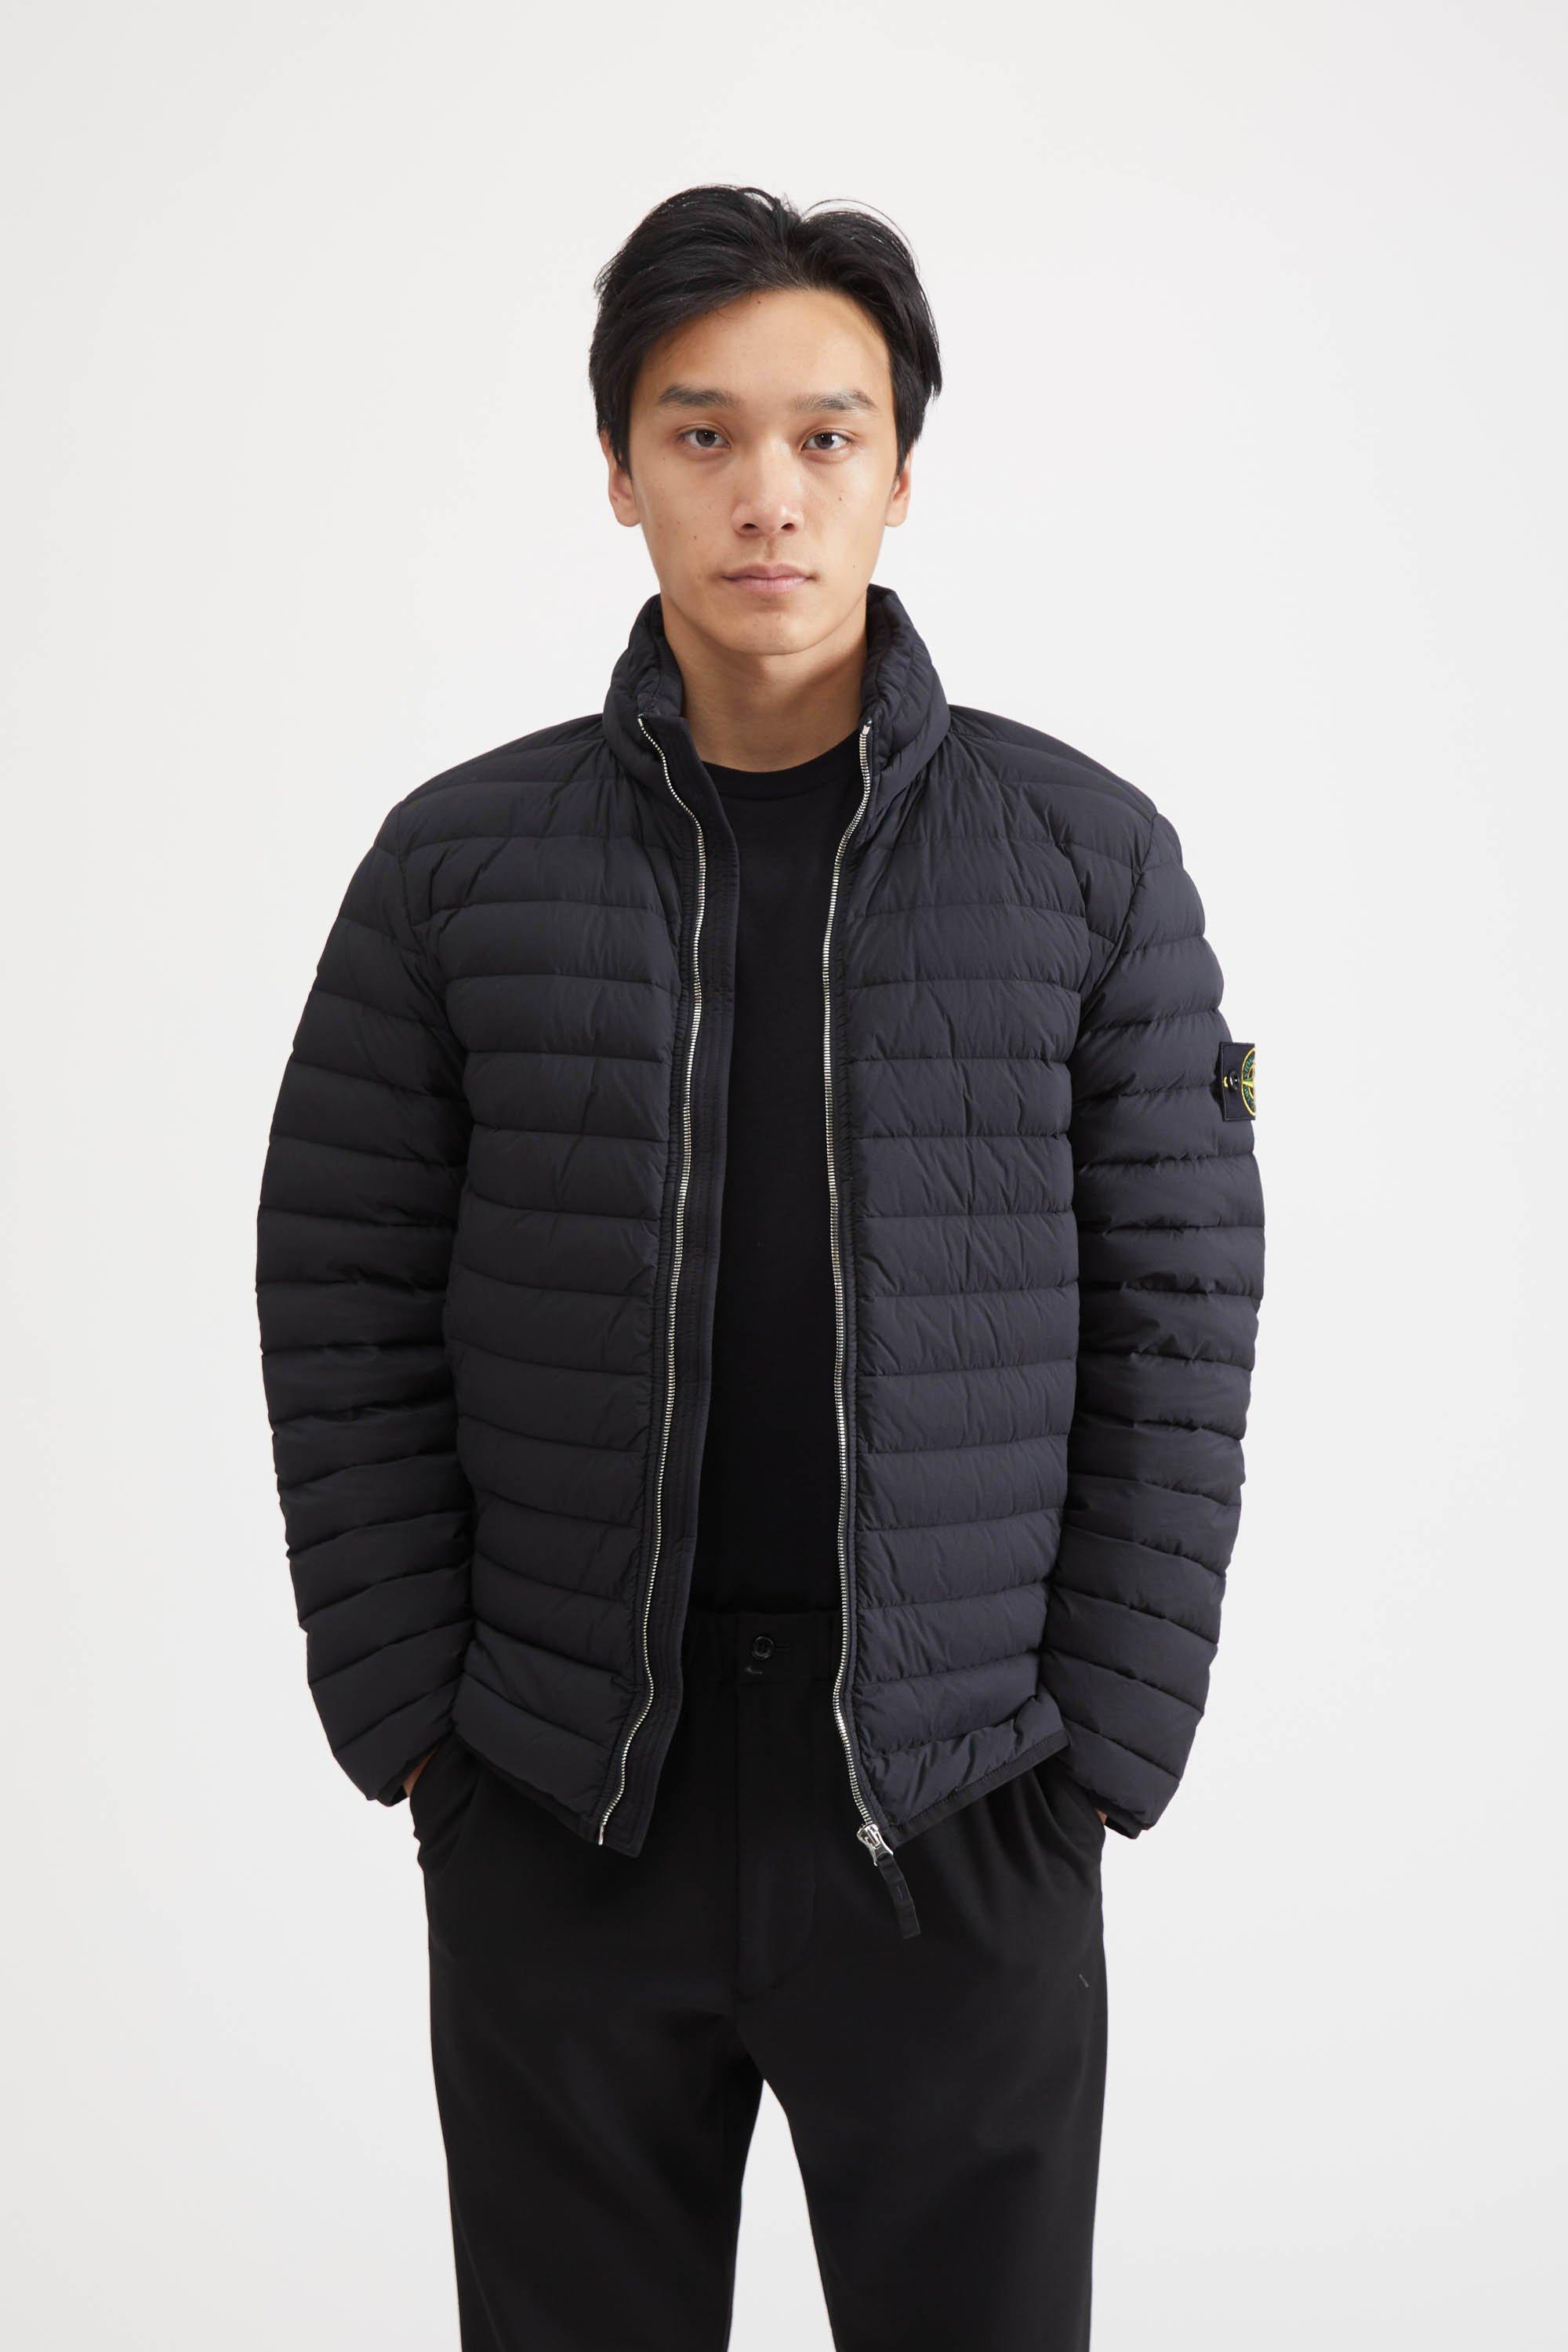 Stone Island Synthetic 41025 Loom Woven Down Chambers Stretch Nylon-tc  Jacket in Black for Men - Lyst